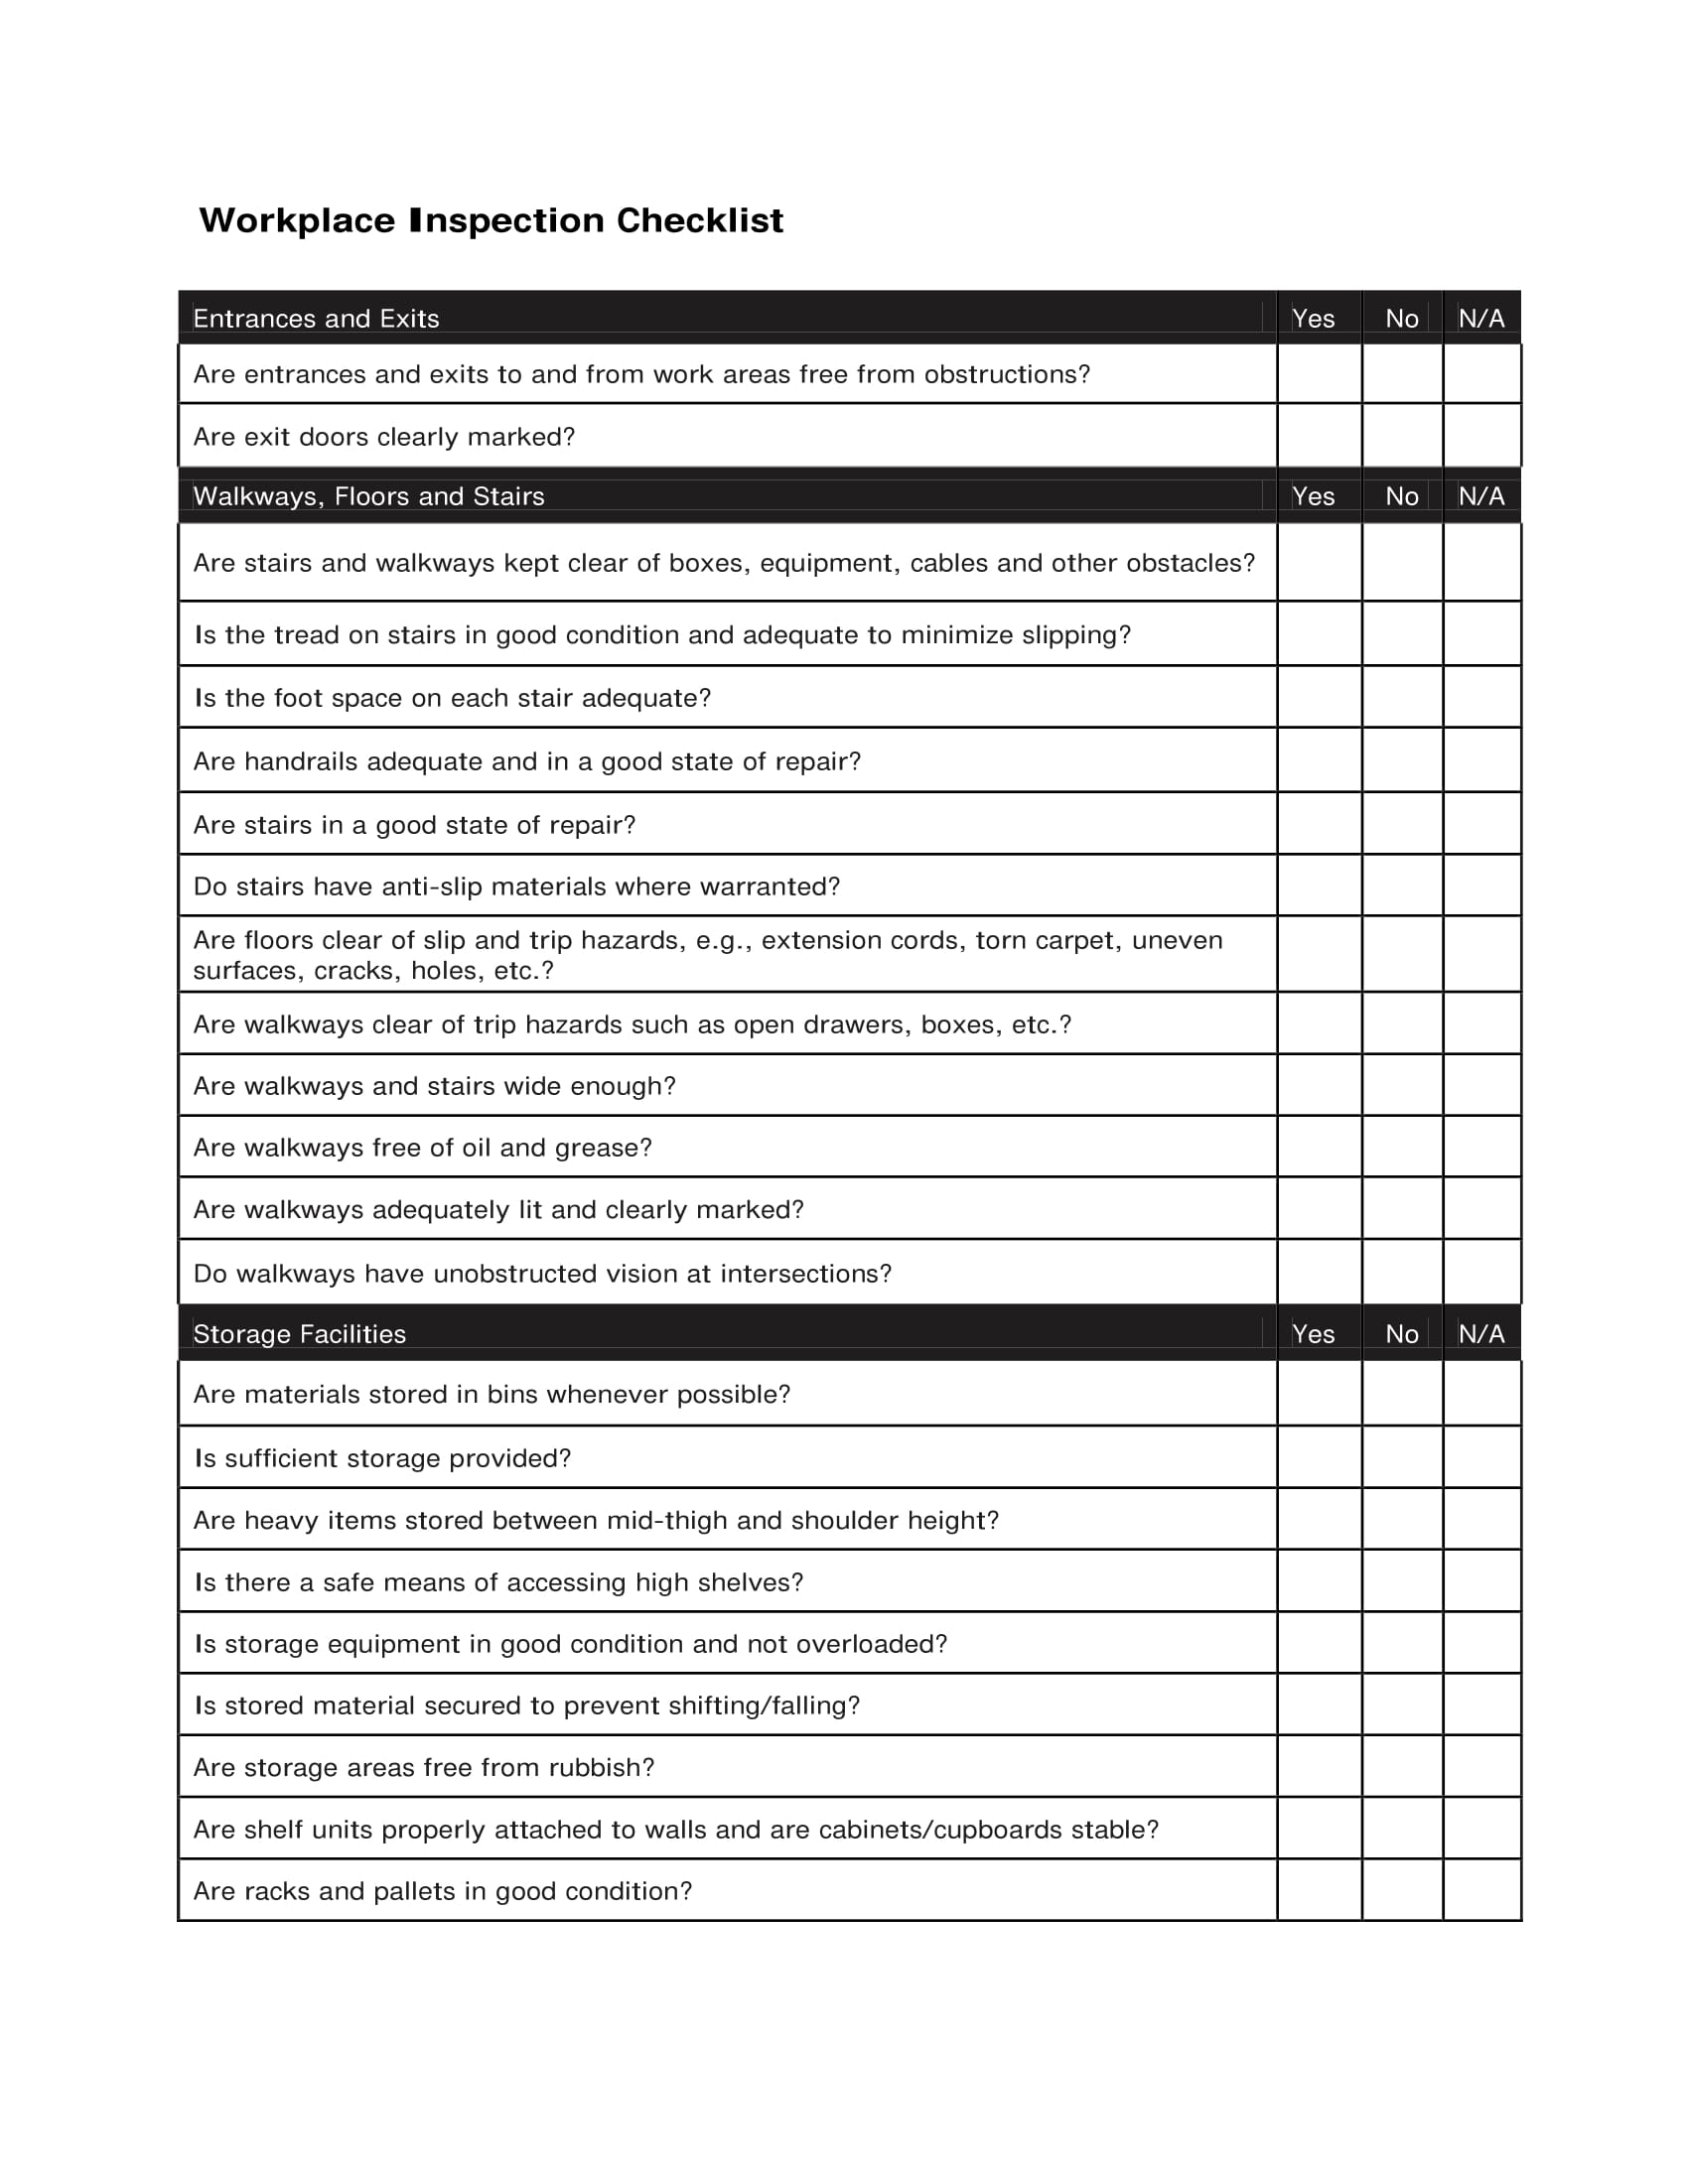 Workplace Inspection Checklist 10+ Examples, Format, Pdf Examples